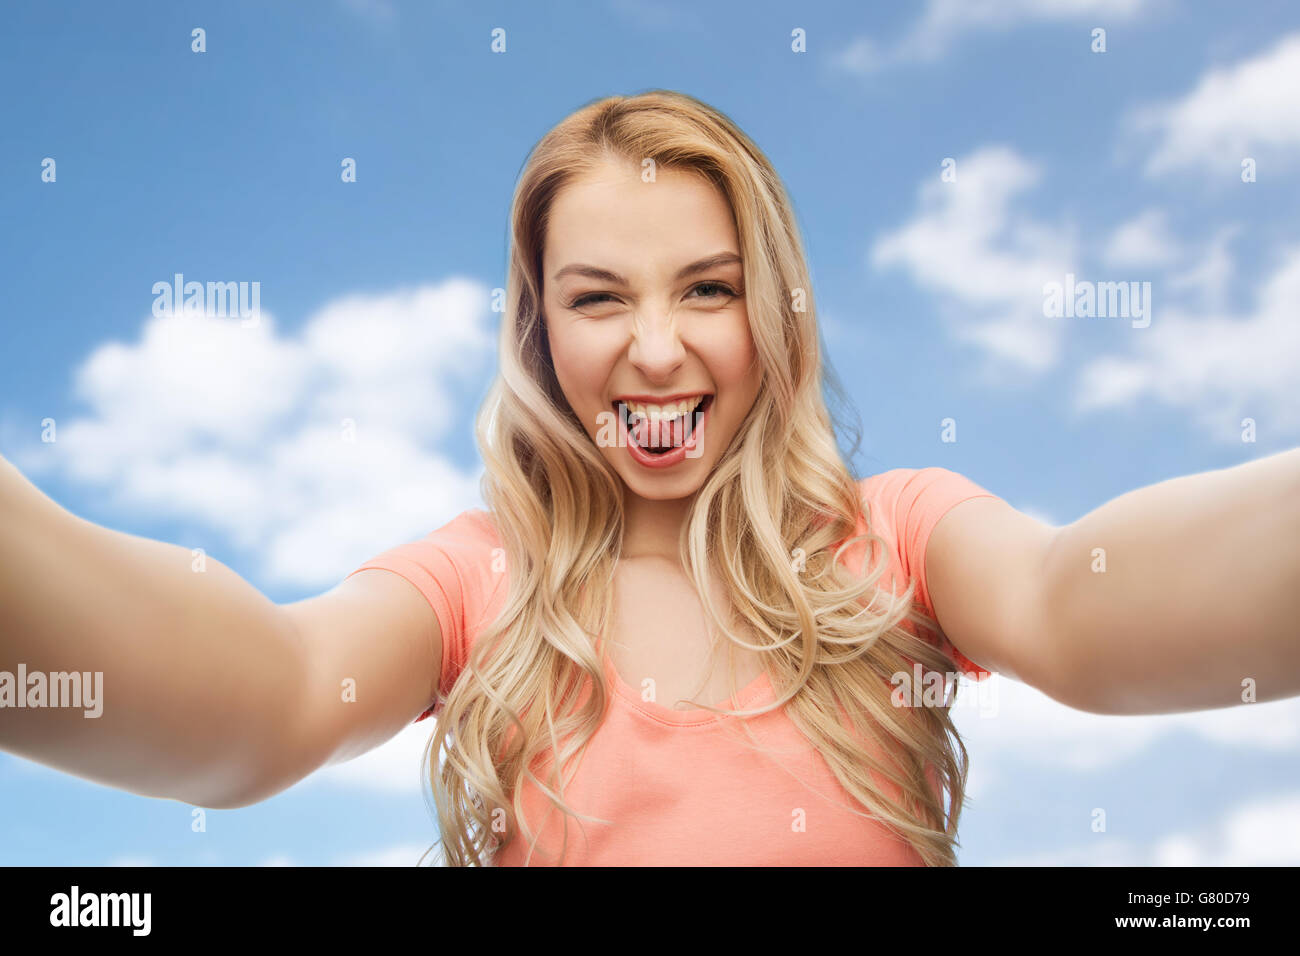 Happy smiling young woman taking selfies Banque D'Images